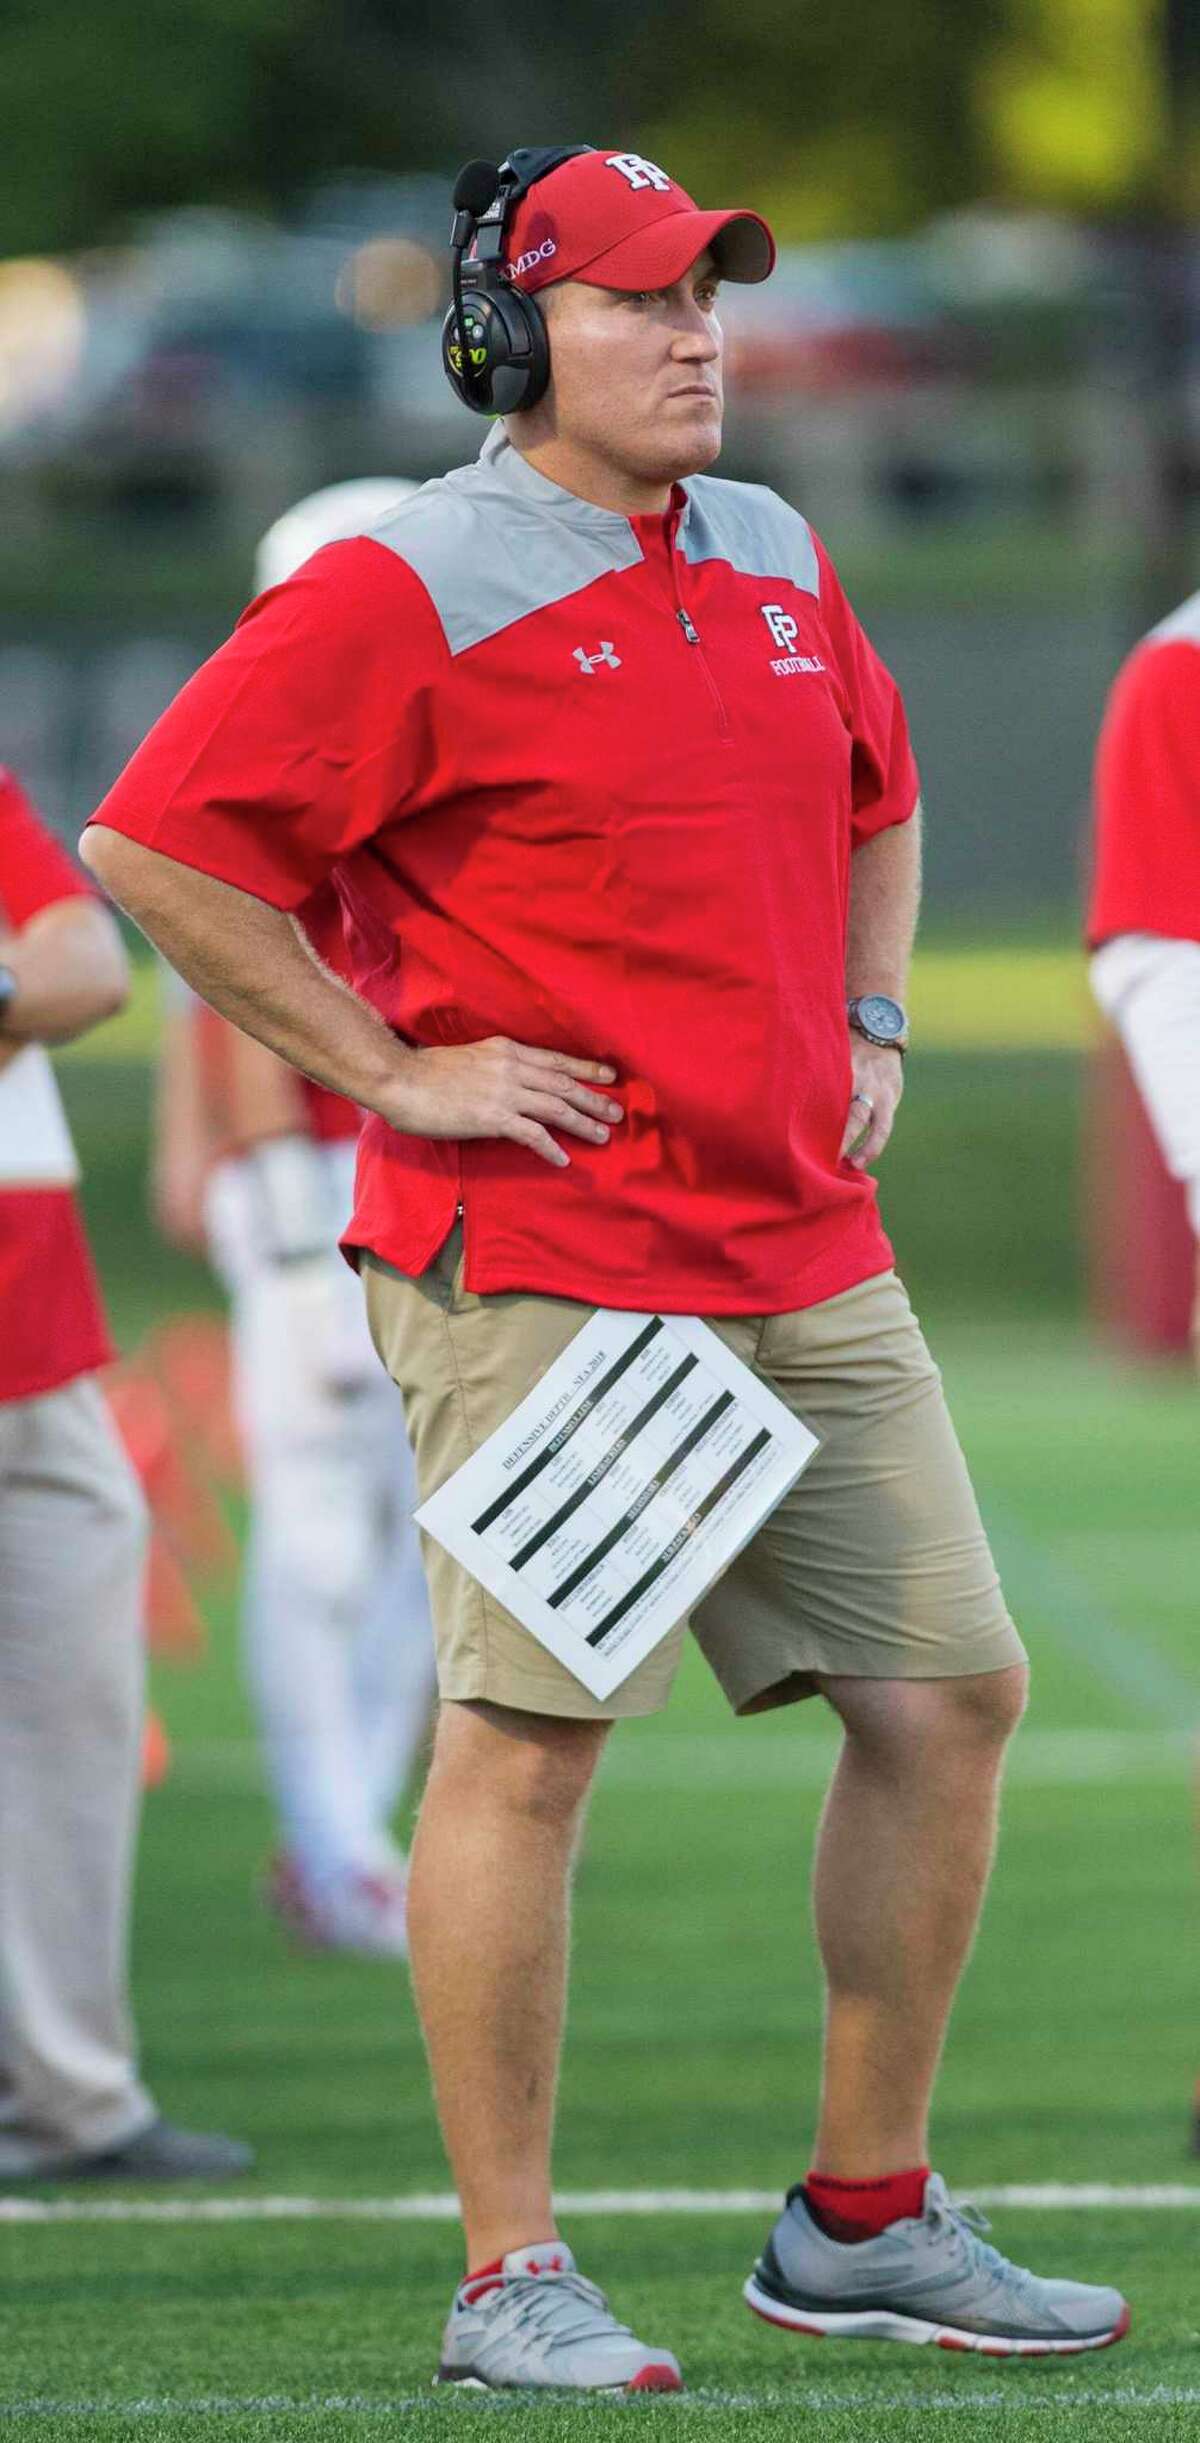 Fairfield Prep coach Keith Hellstern on the sideline during a game against Norwich Free Academy in Fairfield in 2018.